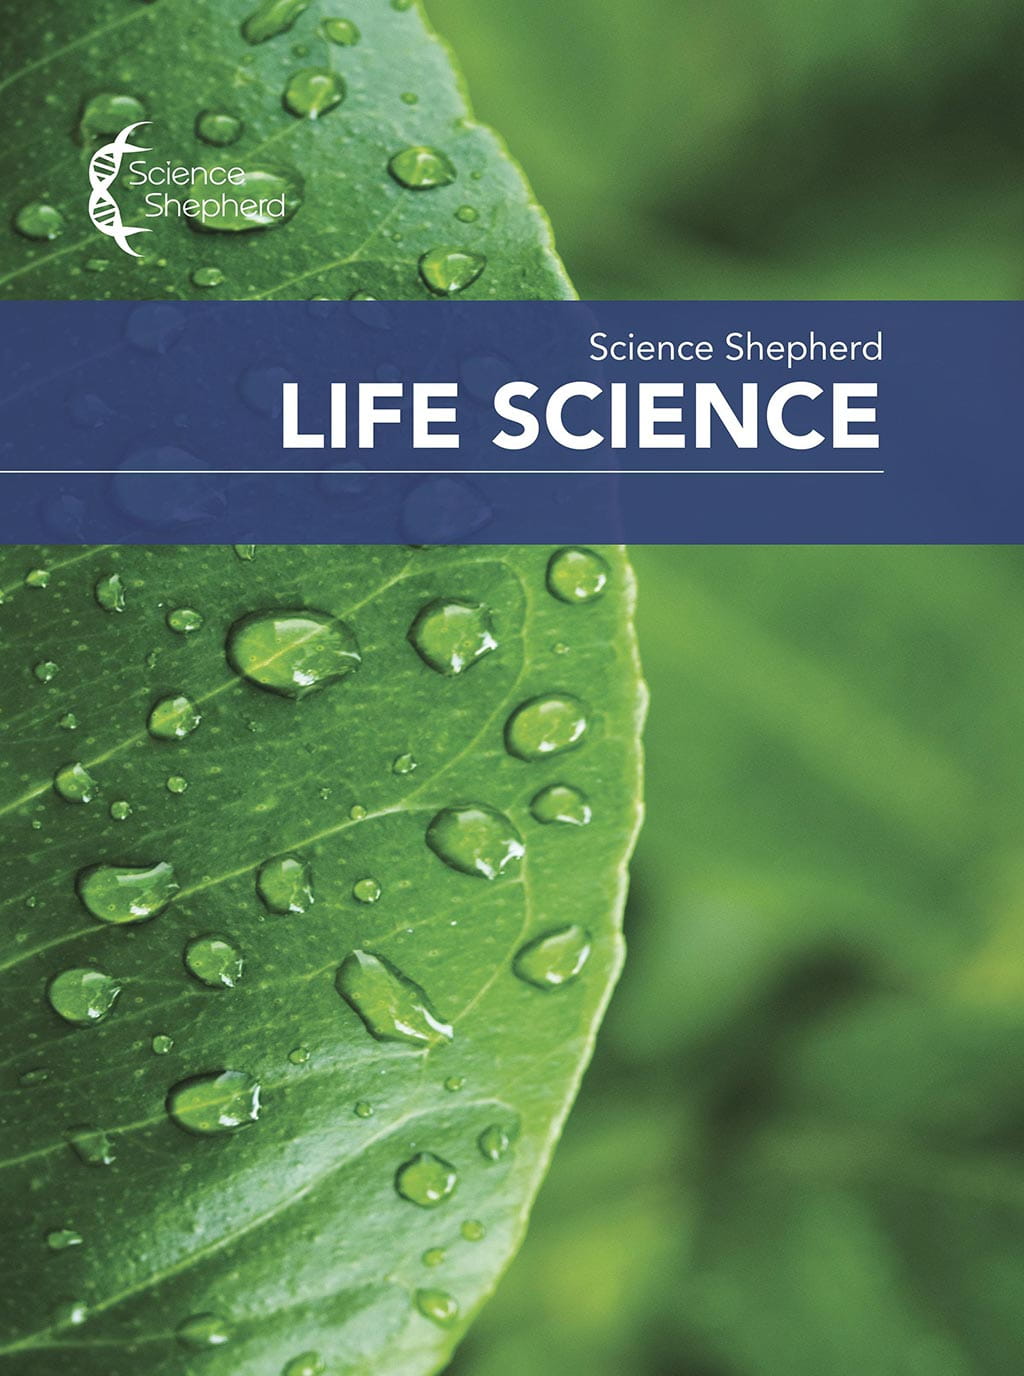 Science Shepherd Life Science homeschool textbook cover of a leaf